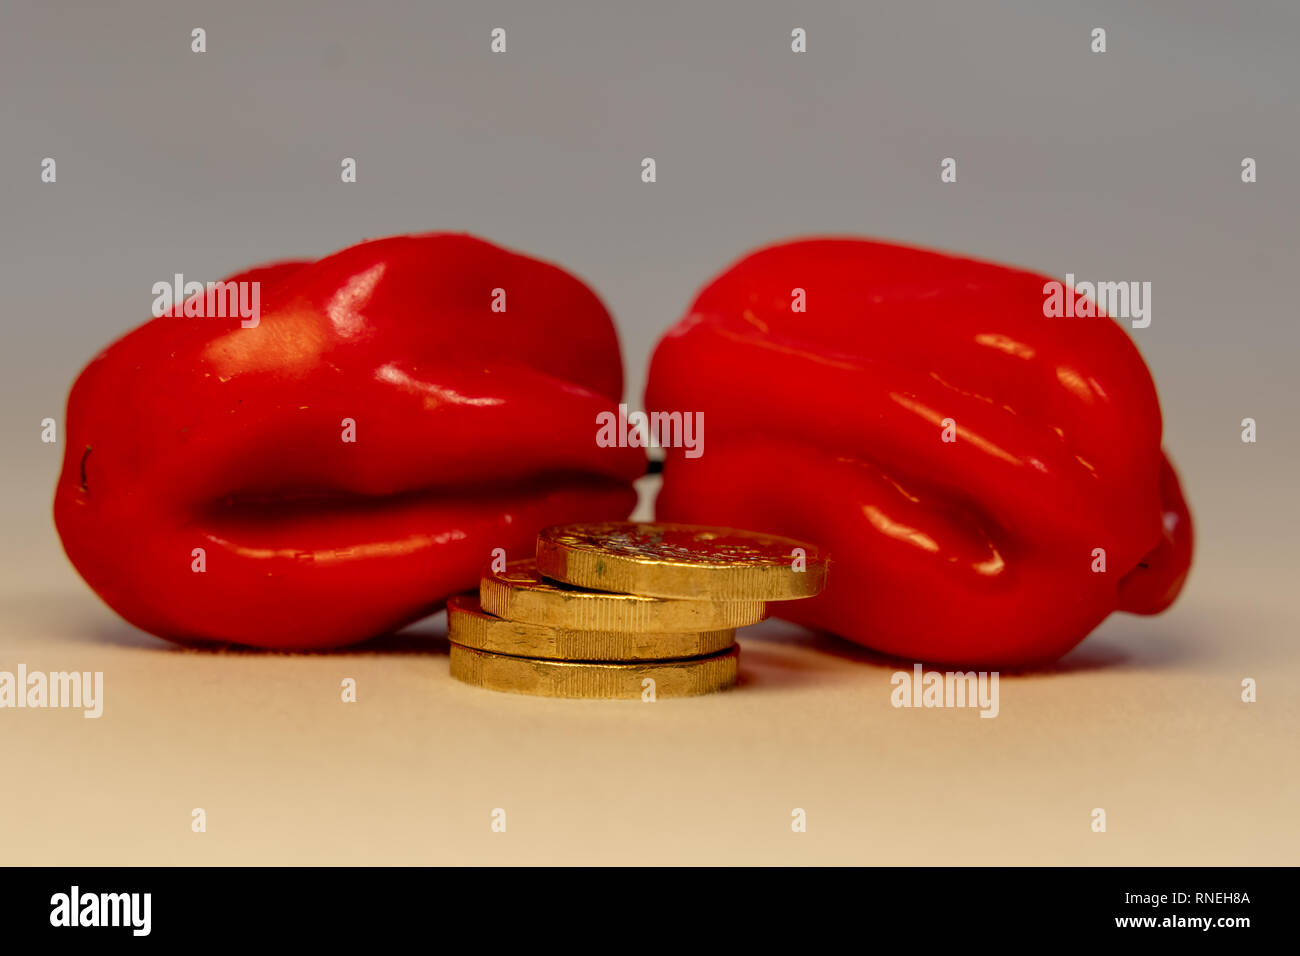 A stack of shining gold coins in front of the red hot Habanero peppers. Fast easy or hot money concept. Stock Photo